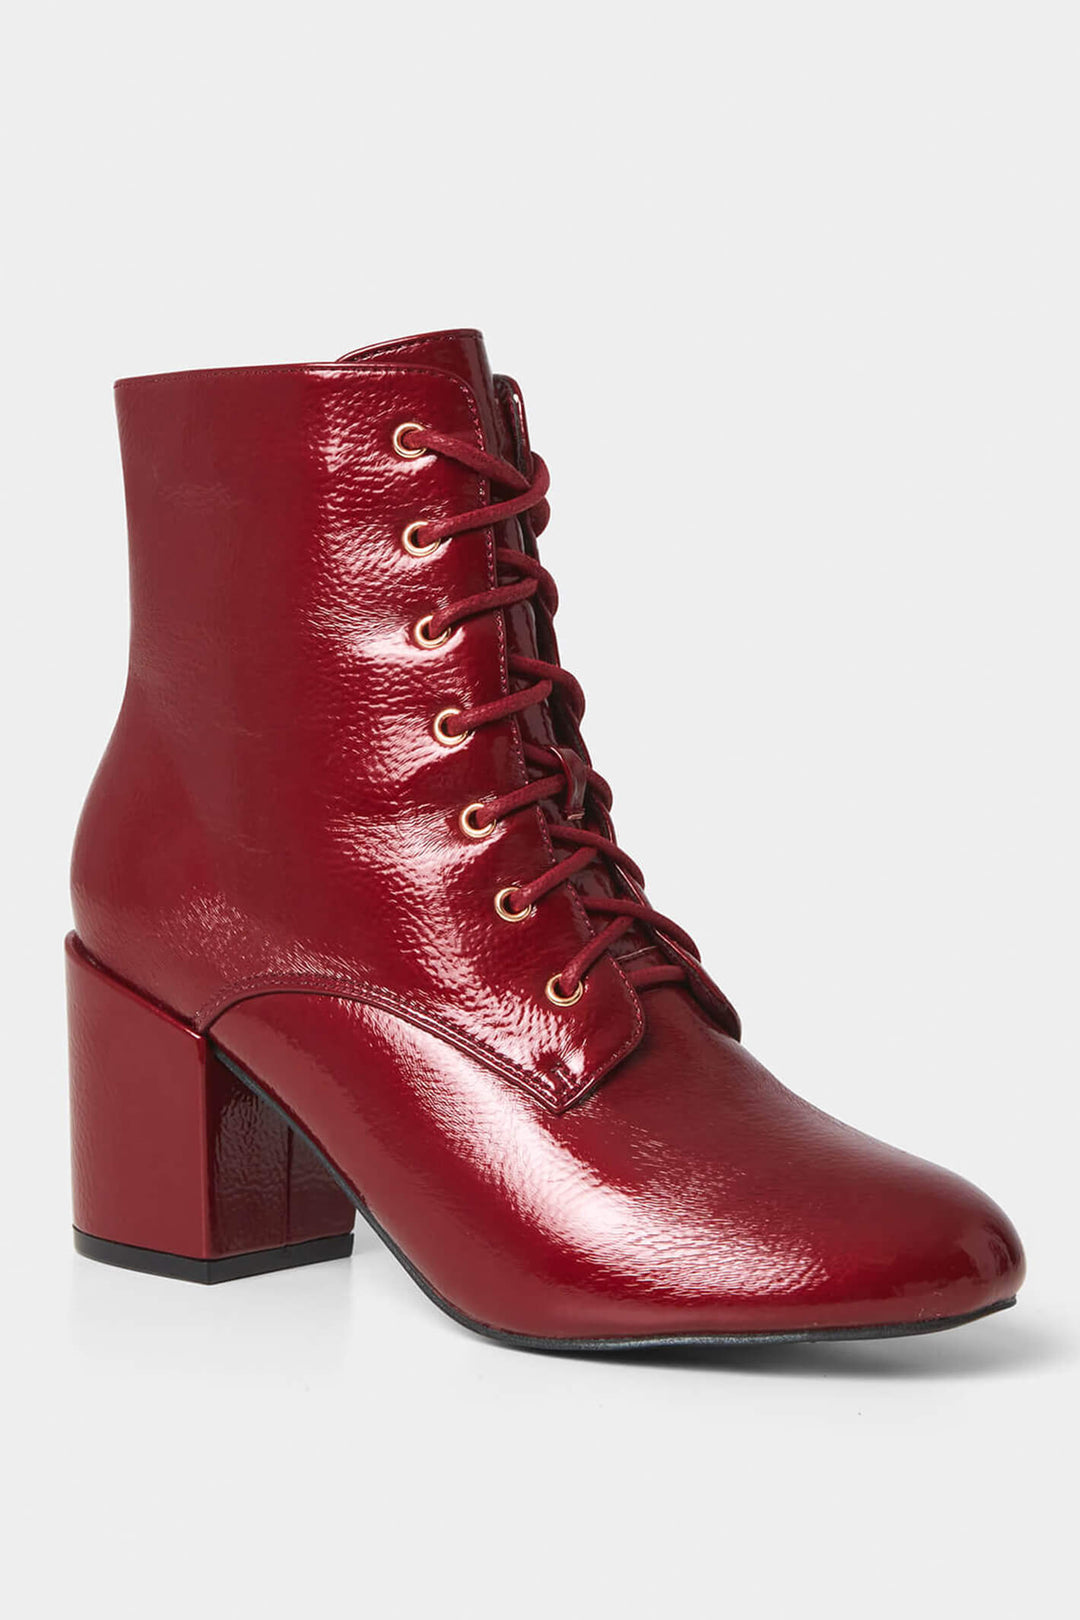 Joe Browns KA164 Red Love Letter Patent Boots - Experience Boutique